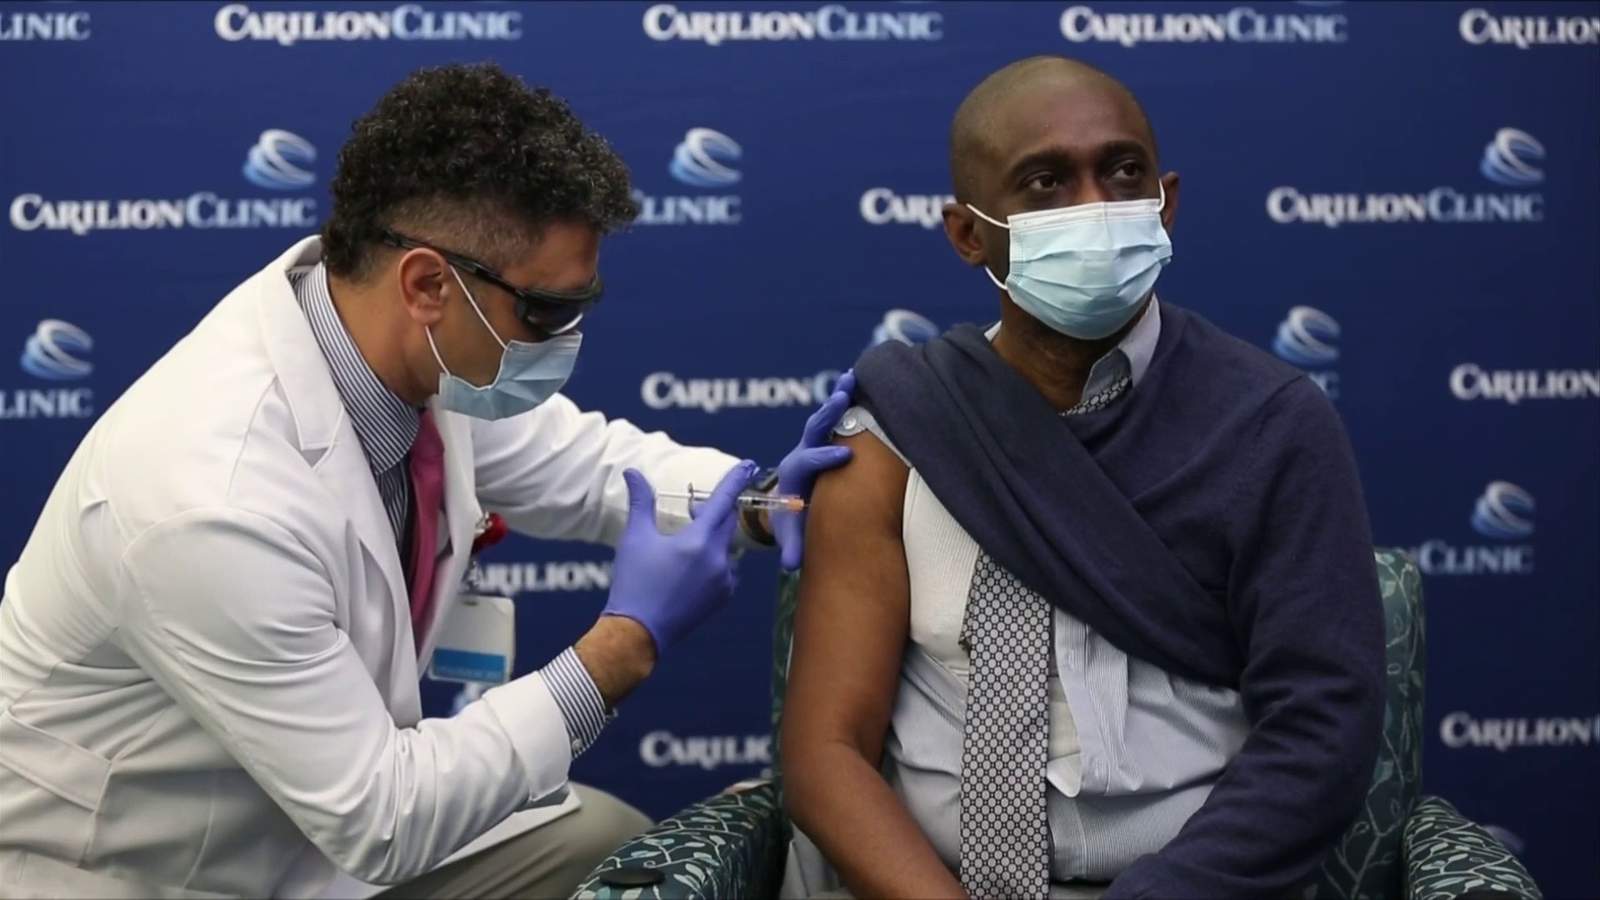 6,000 Carilion employees have received the COVID-19 vaccine